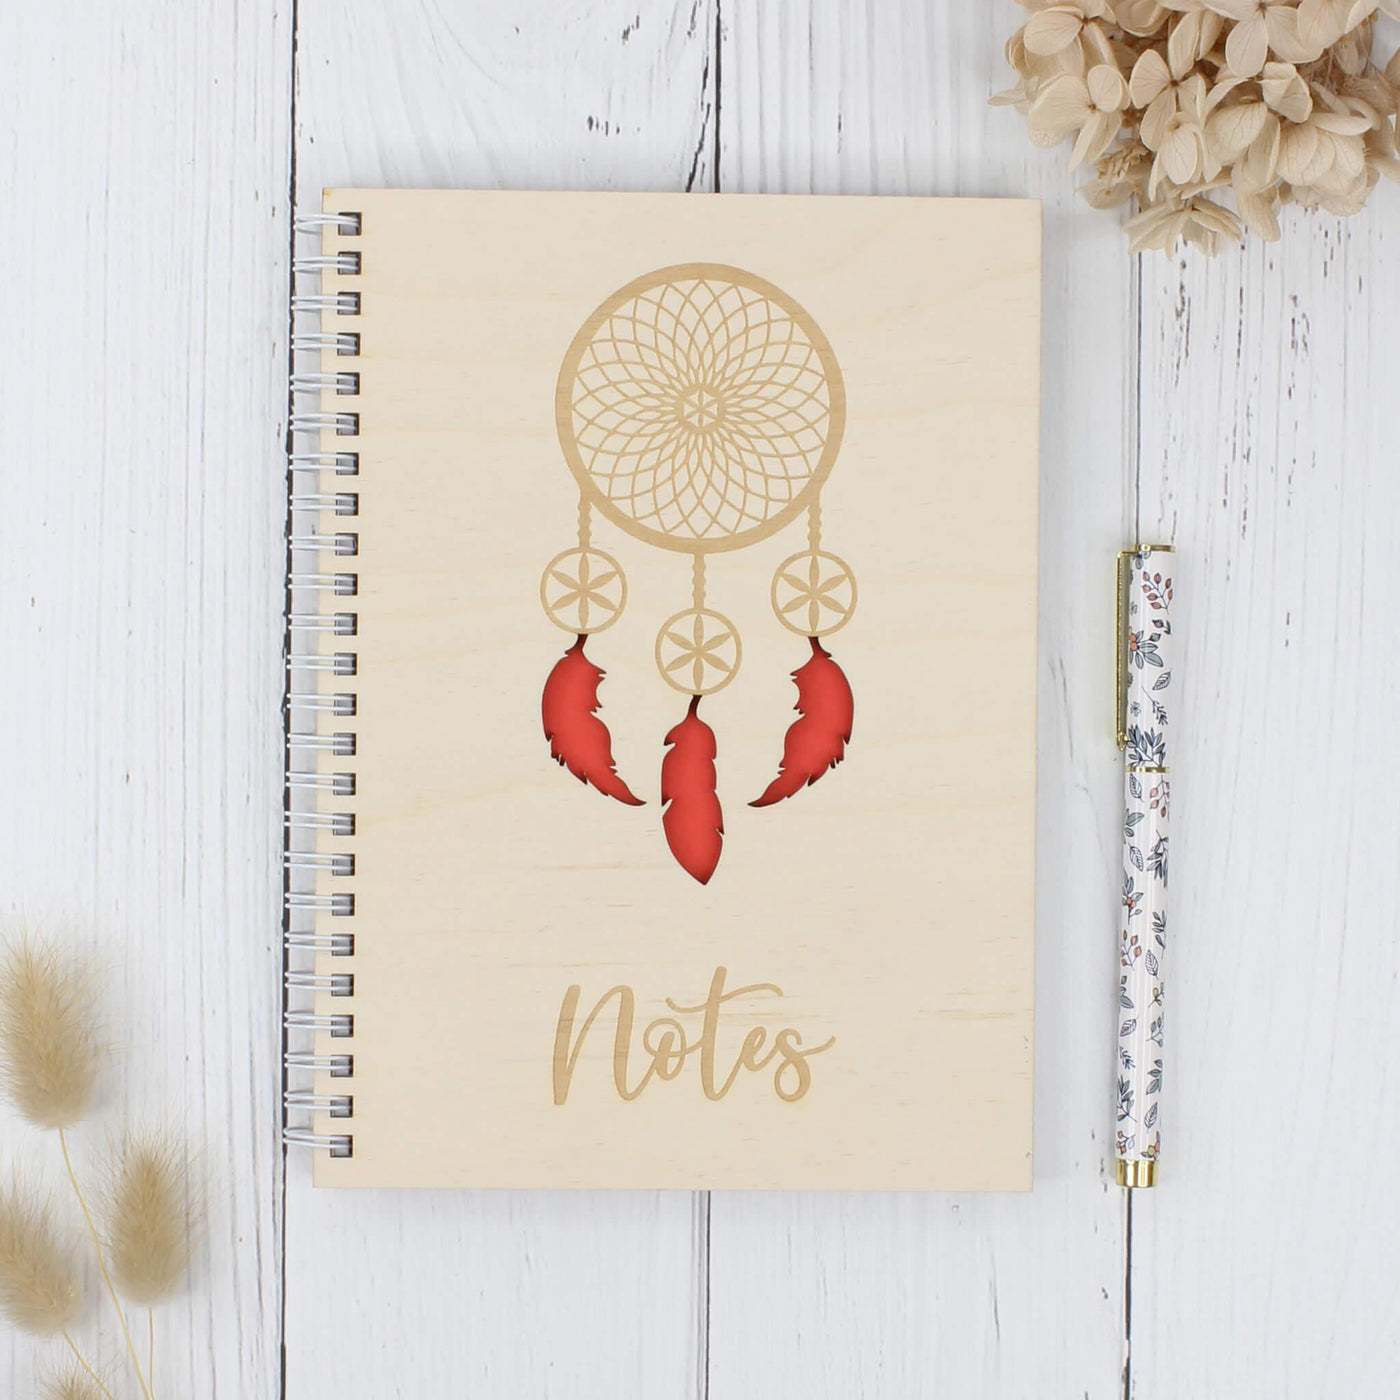 Personalised wooden notebook - dreamcatcher red